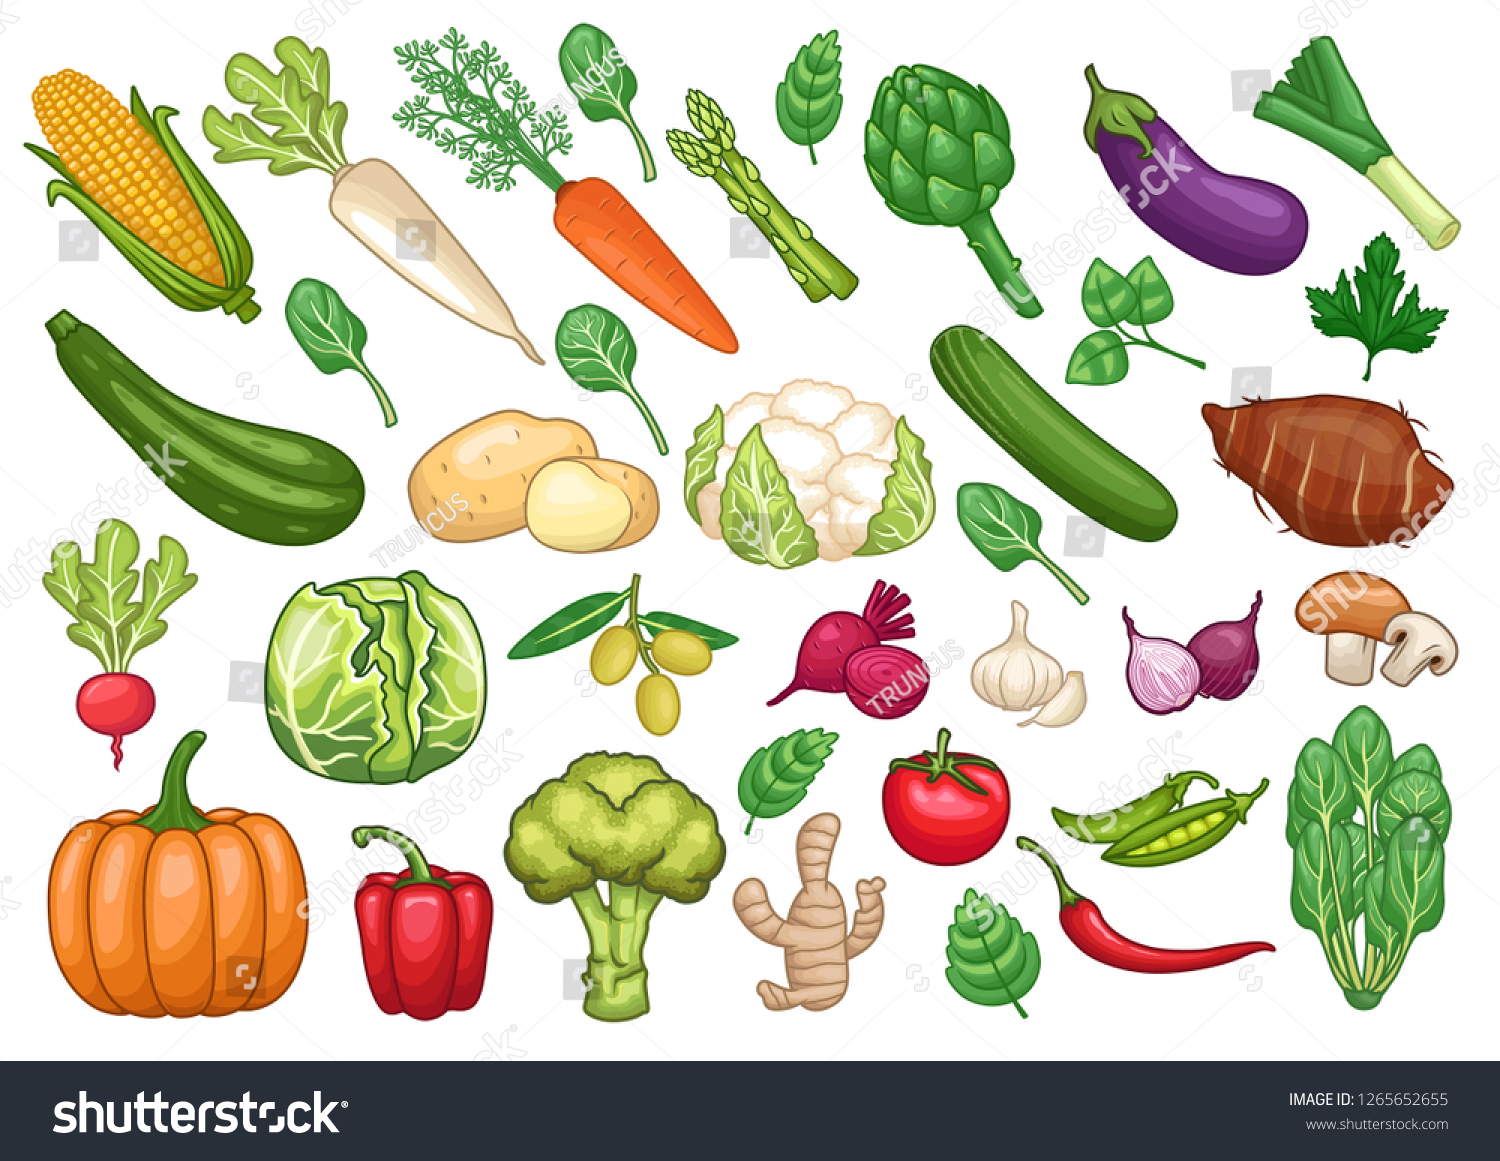 stock vector set of vegetables graphic object illustration #1265652655